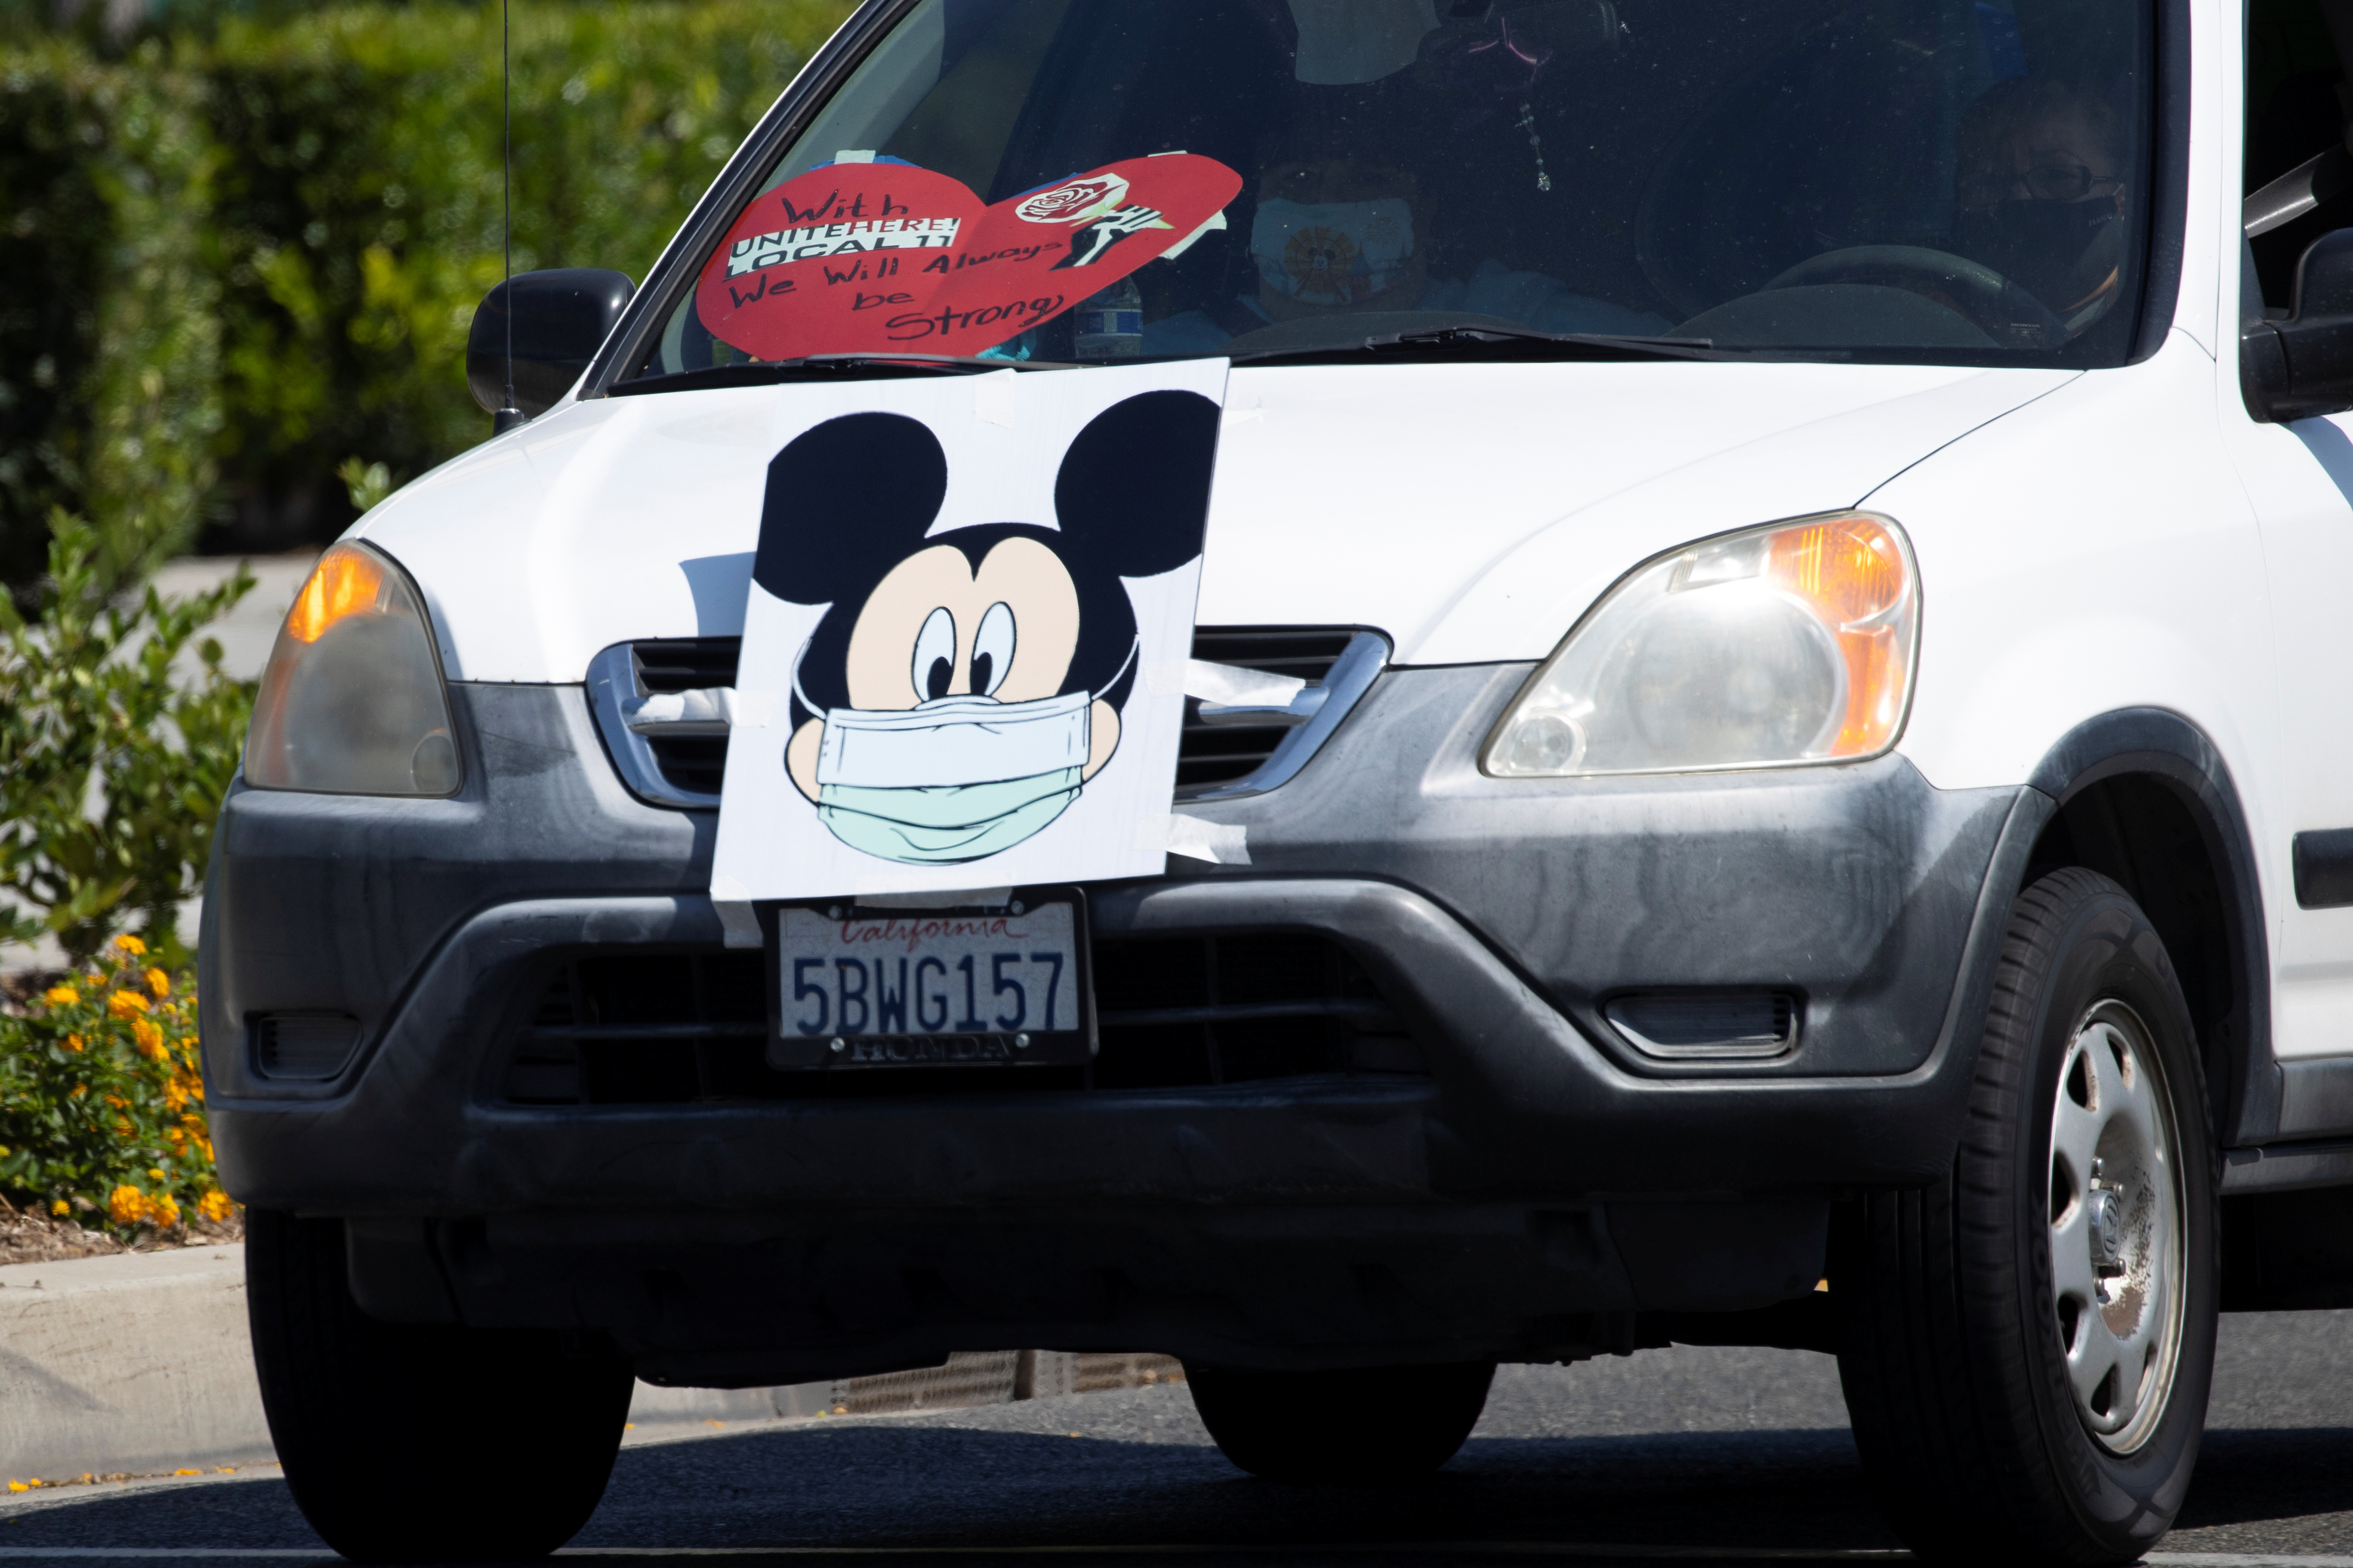 Coalition of Resort Labor Unions representing Disney cast members stage a car caravan outside Disneyland California, calling for higher safety standards for Disneyland to reopen during the global outbreak of the coronavirus disease (COVID-19) in Anaheim, California, U.S., June 27, 2020. REUTERS/Mike Blake